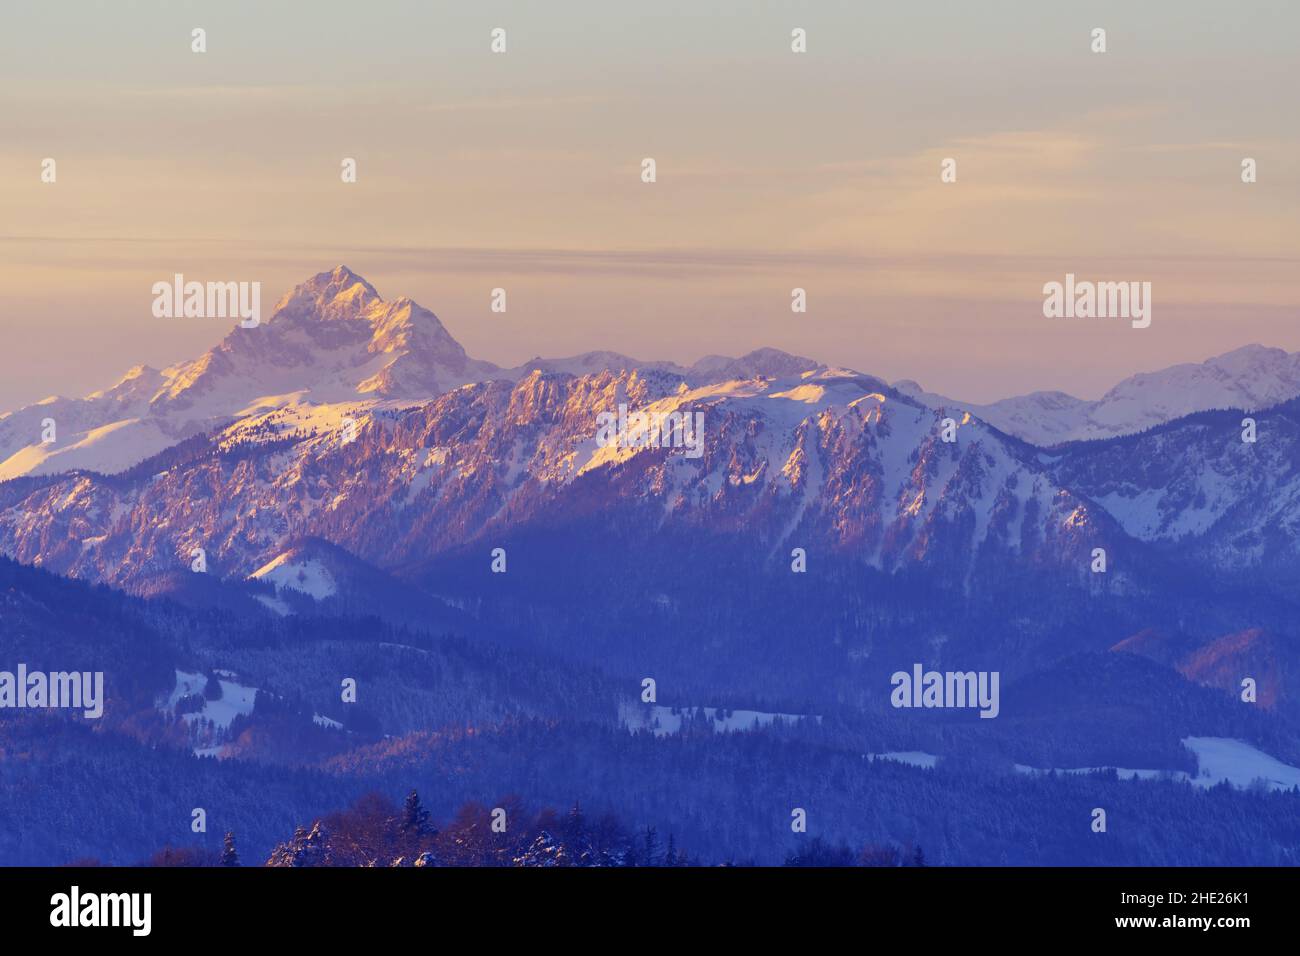 Magical view of Triglav, the highest peak in Julian Alps at sunset in winter. Winter landscape. Travel, tourism, environment and serenity concepts Stock Photo